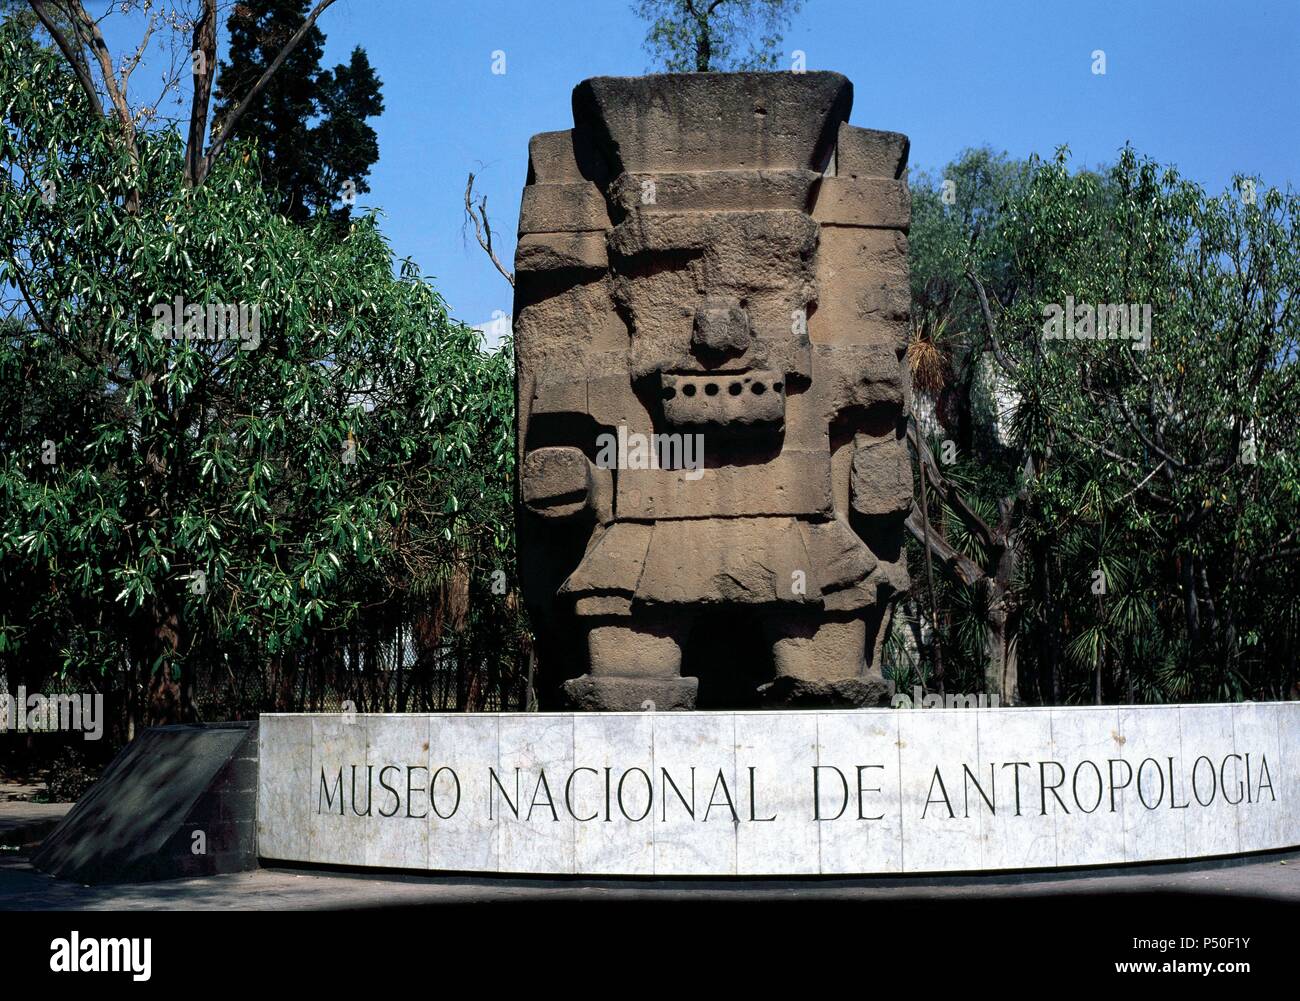 Pre-Columbian art. Aztec. Tlaloc. Nahua deity, lord of the land and the god of rain. Monolith at the entrance of the National Museum of Anthropology. Mexico City. Mexico. Stock Photo